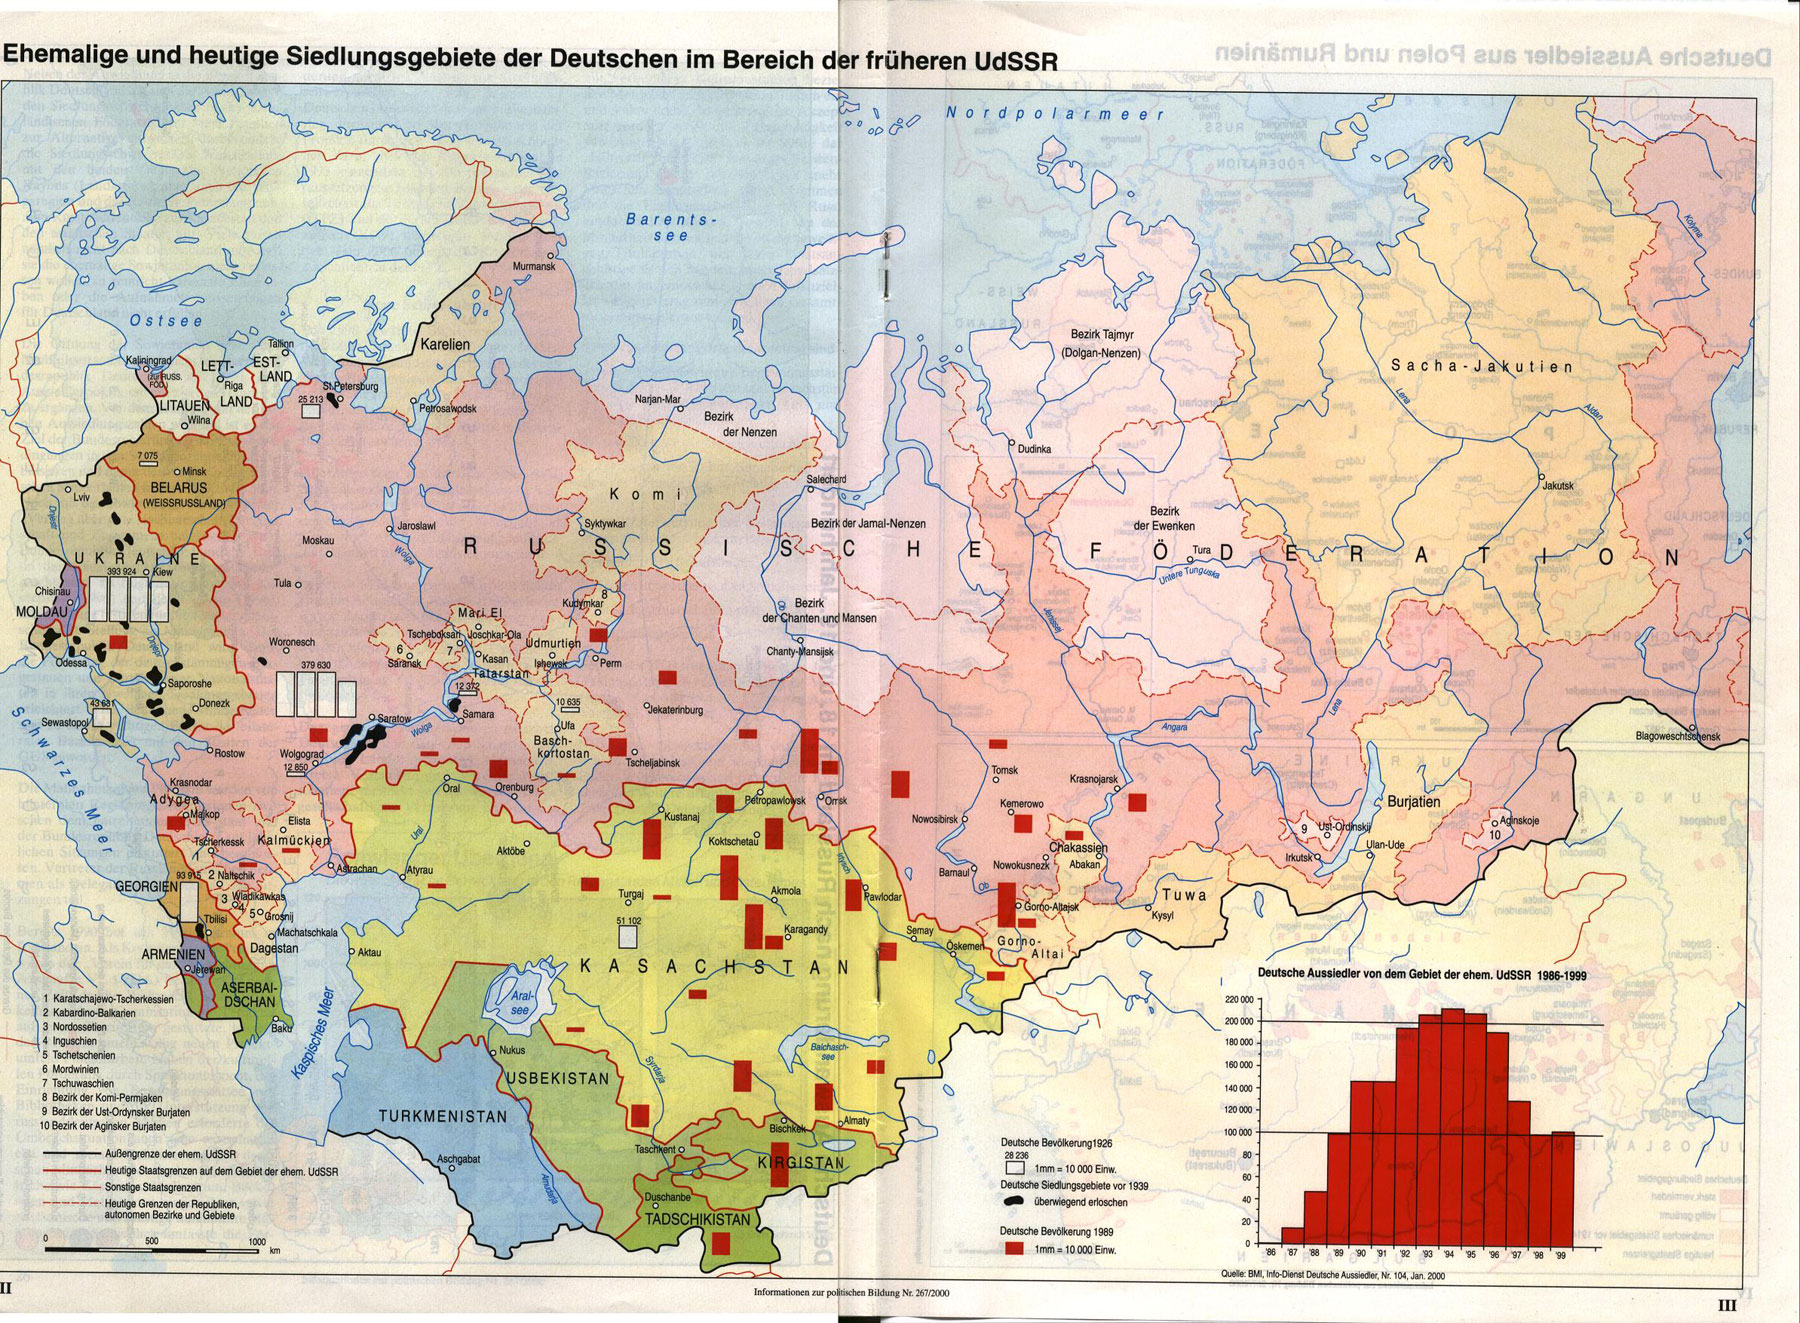 German settlements in the USSR after 1941.